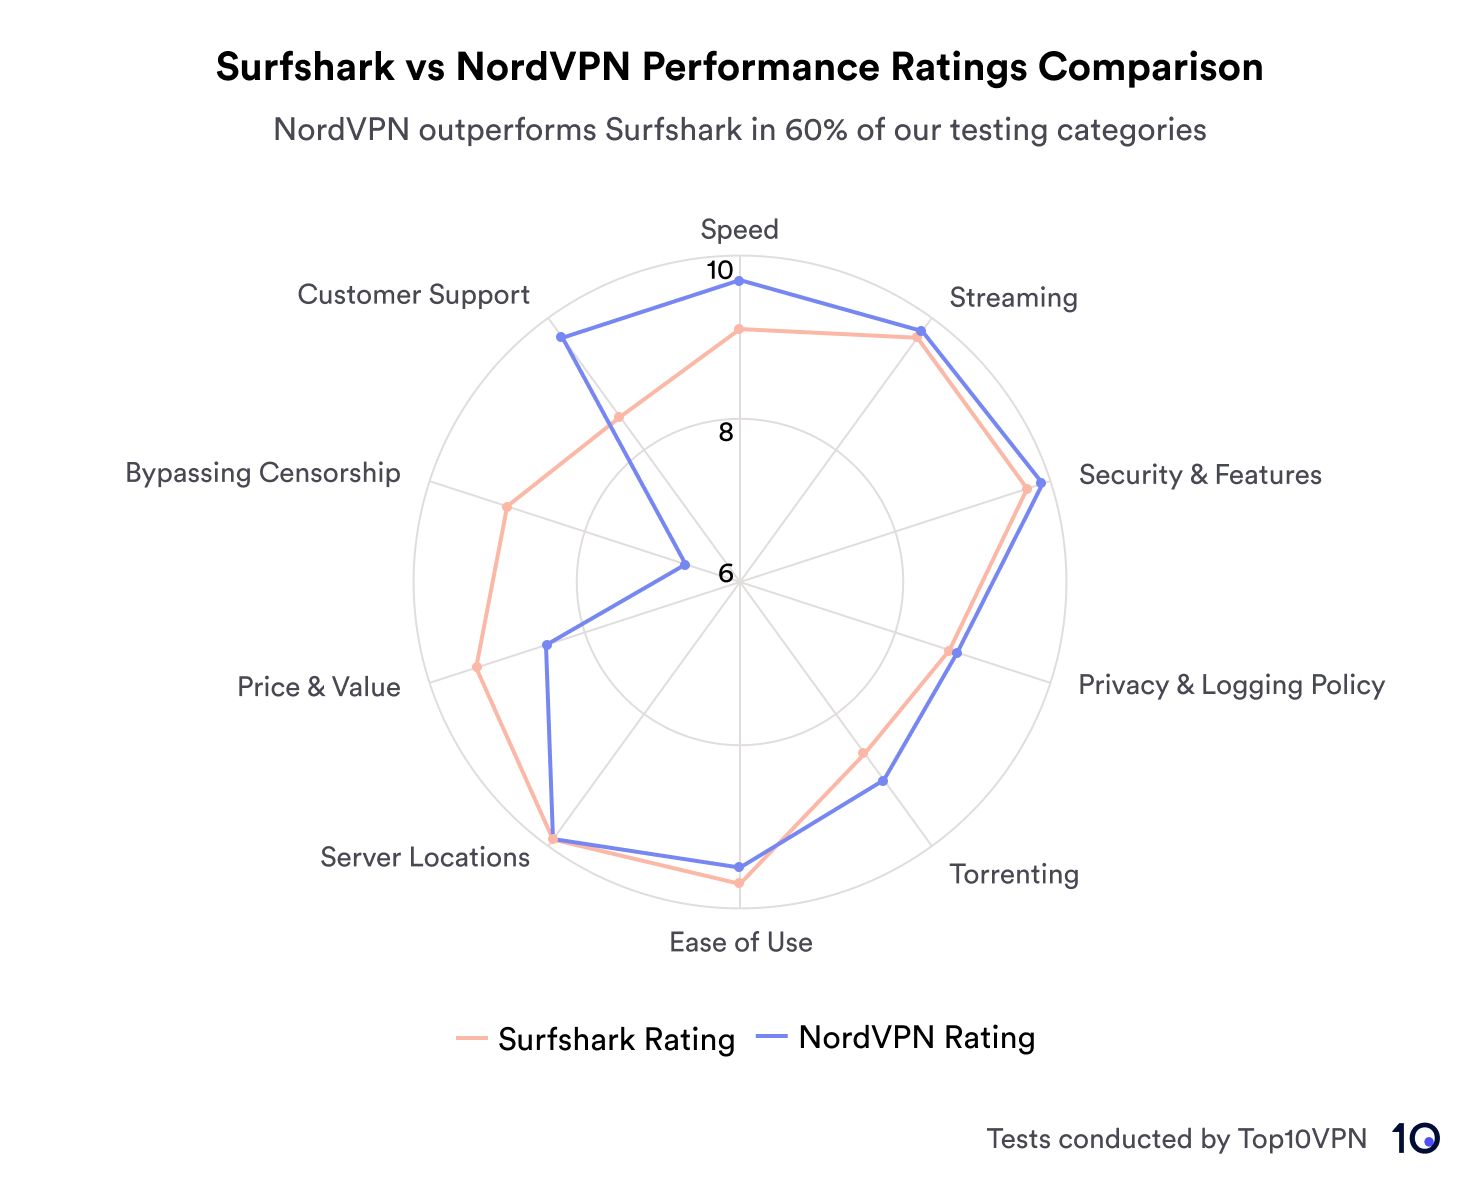 Radar chart comparing Surfshark and NordVPN on various performance metrics, with NordVPN leading in most categories.